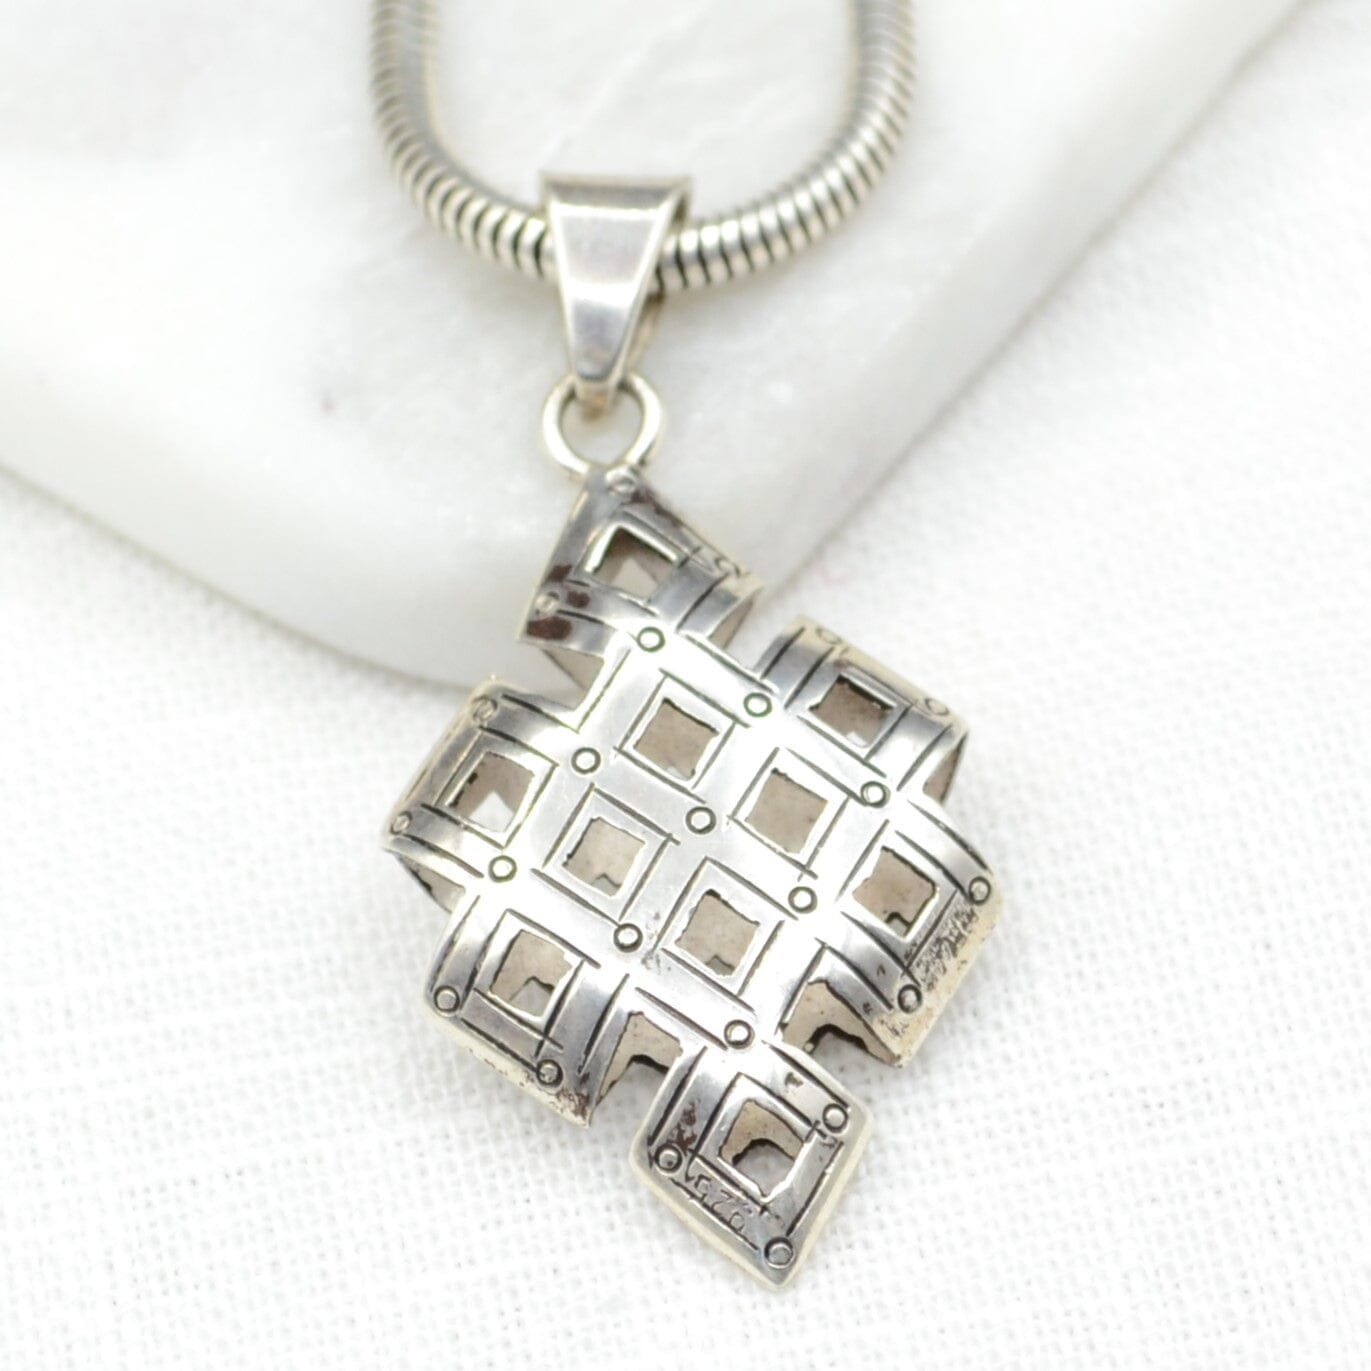 Hollow Etched Endless Knot Silver Necklace Pendant Yak & Yeti 